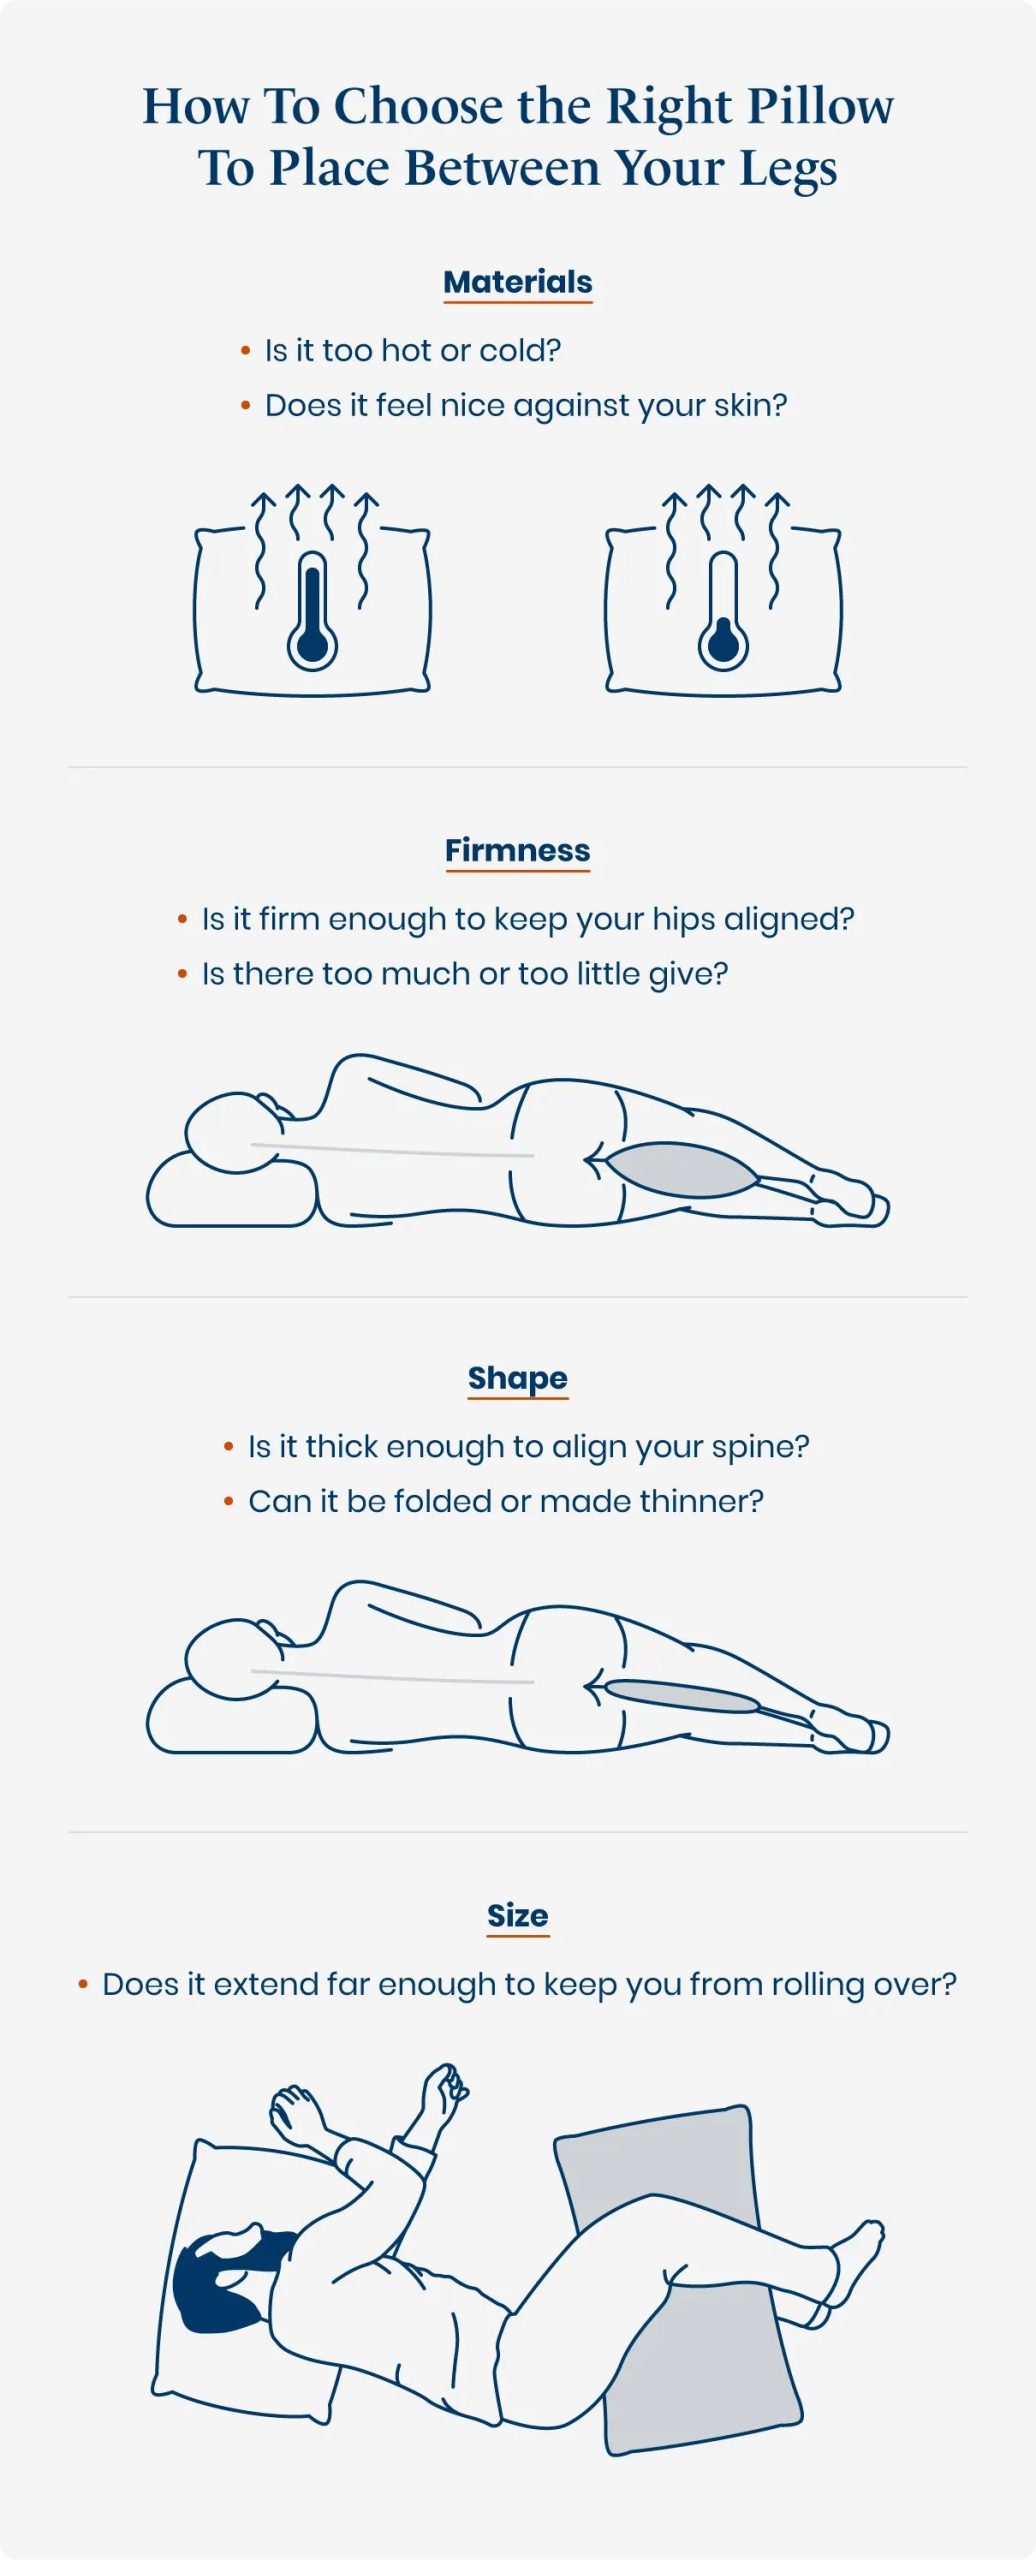 Diagram explaining how to choose the right pillow for between legs.